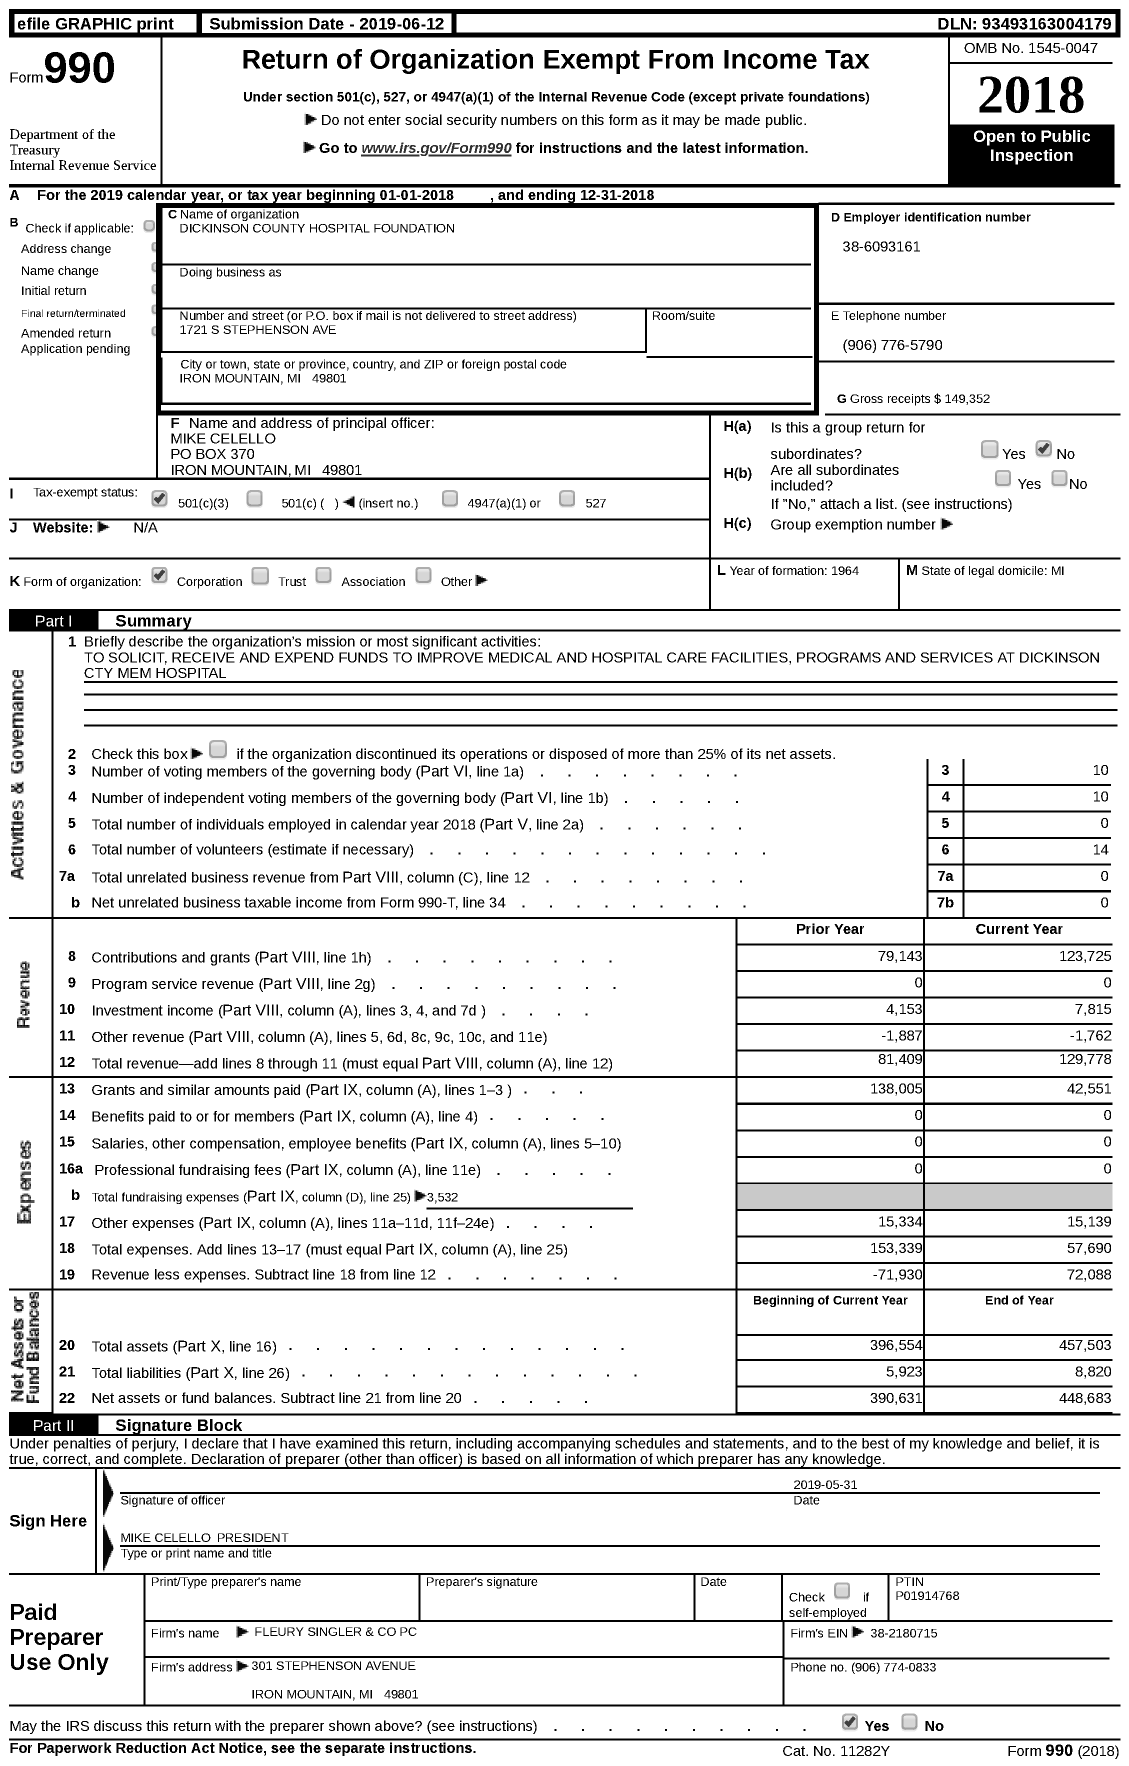 Image of first page of 2018 Form 990 for Dickinson Hospitals' Foundation